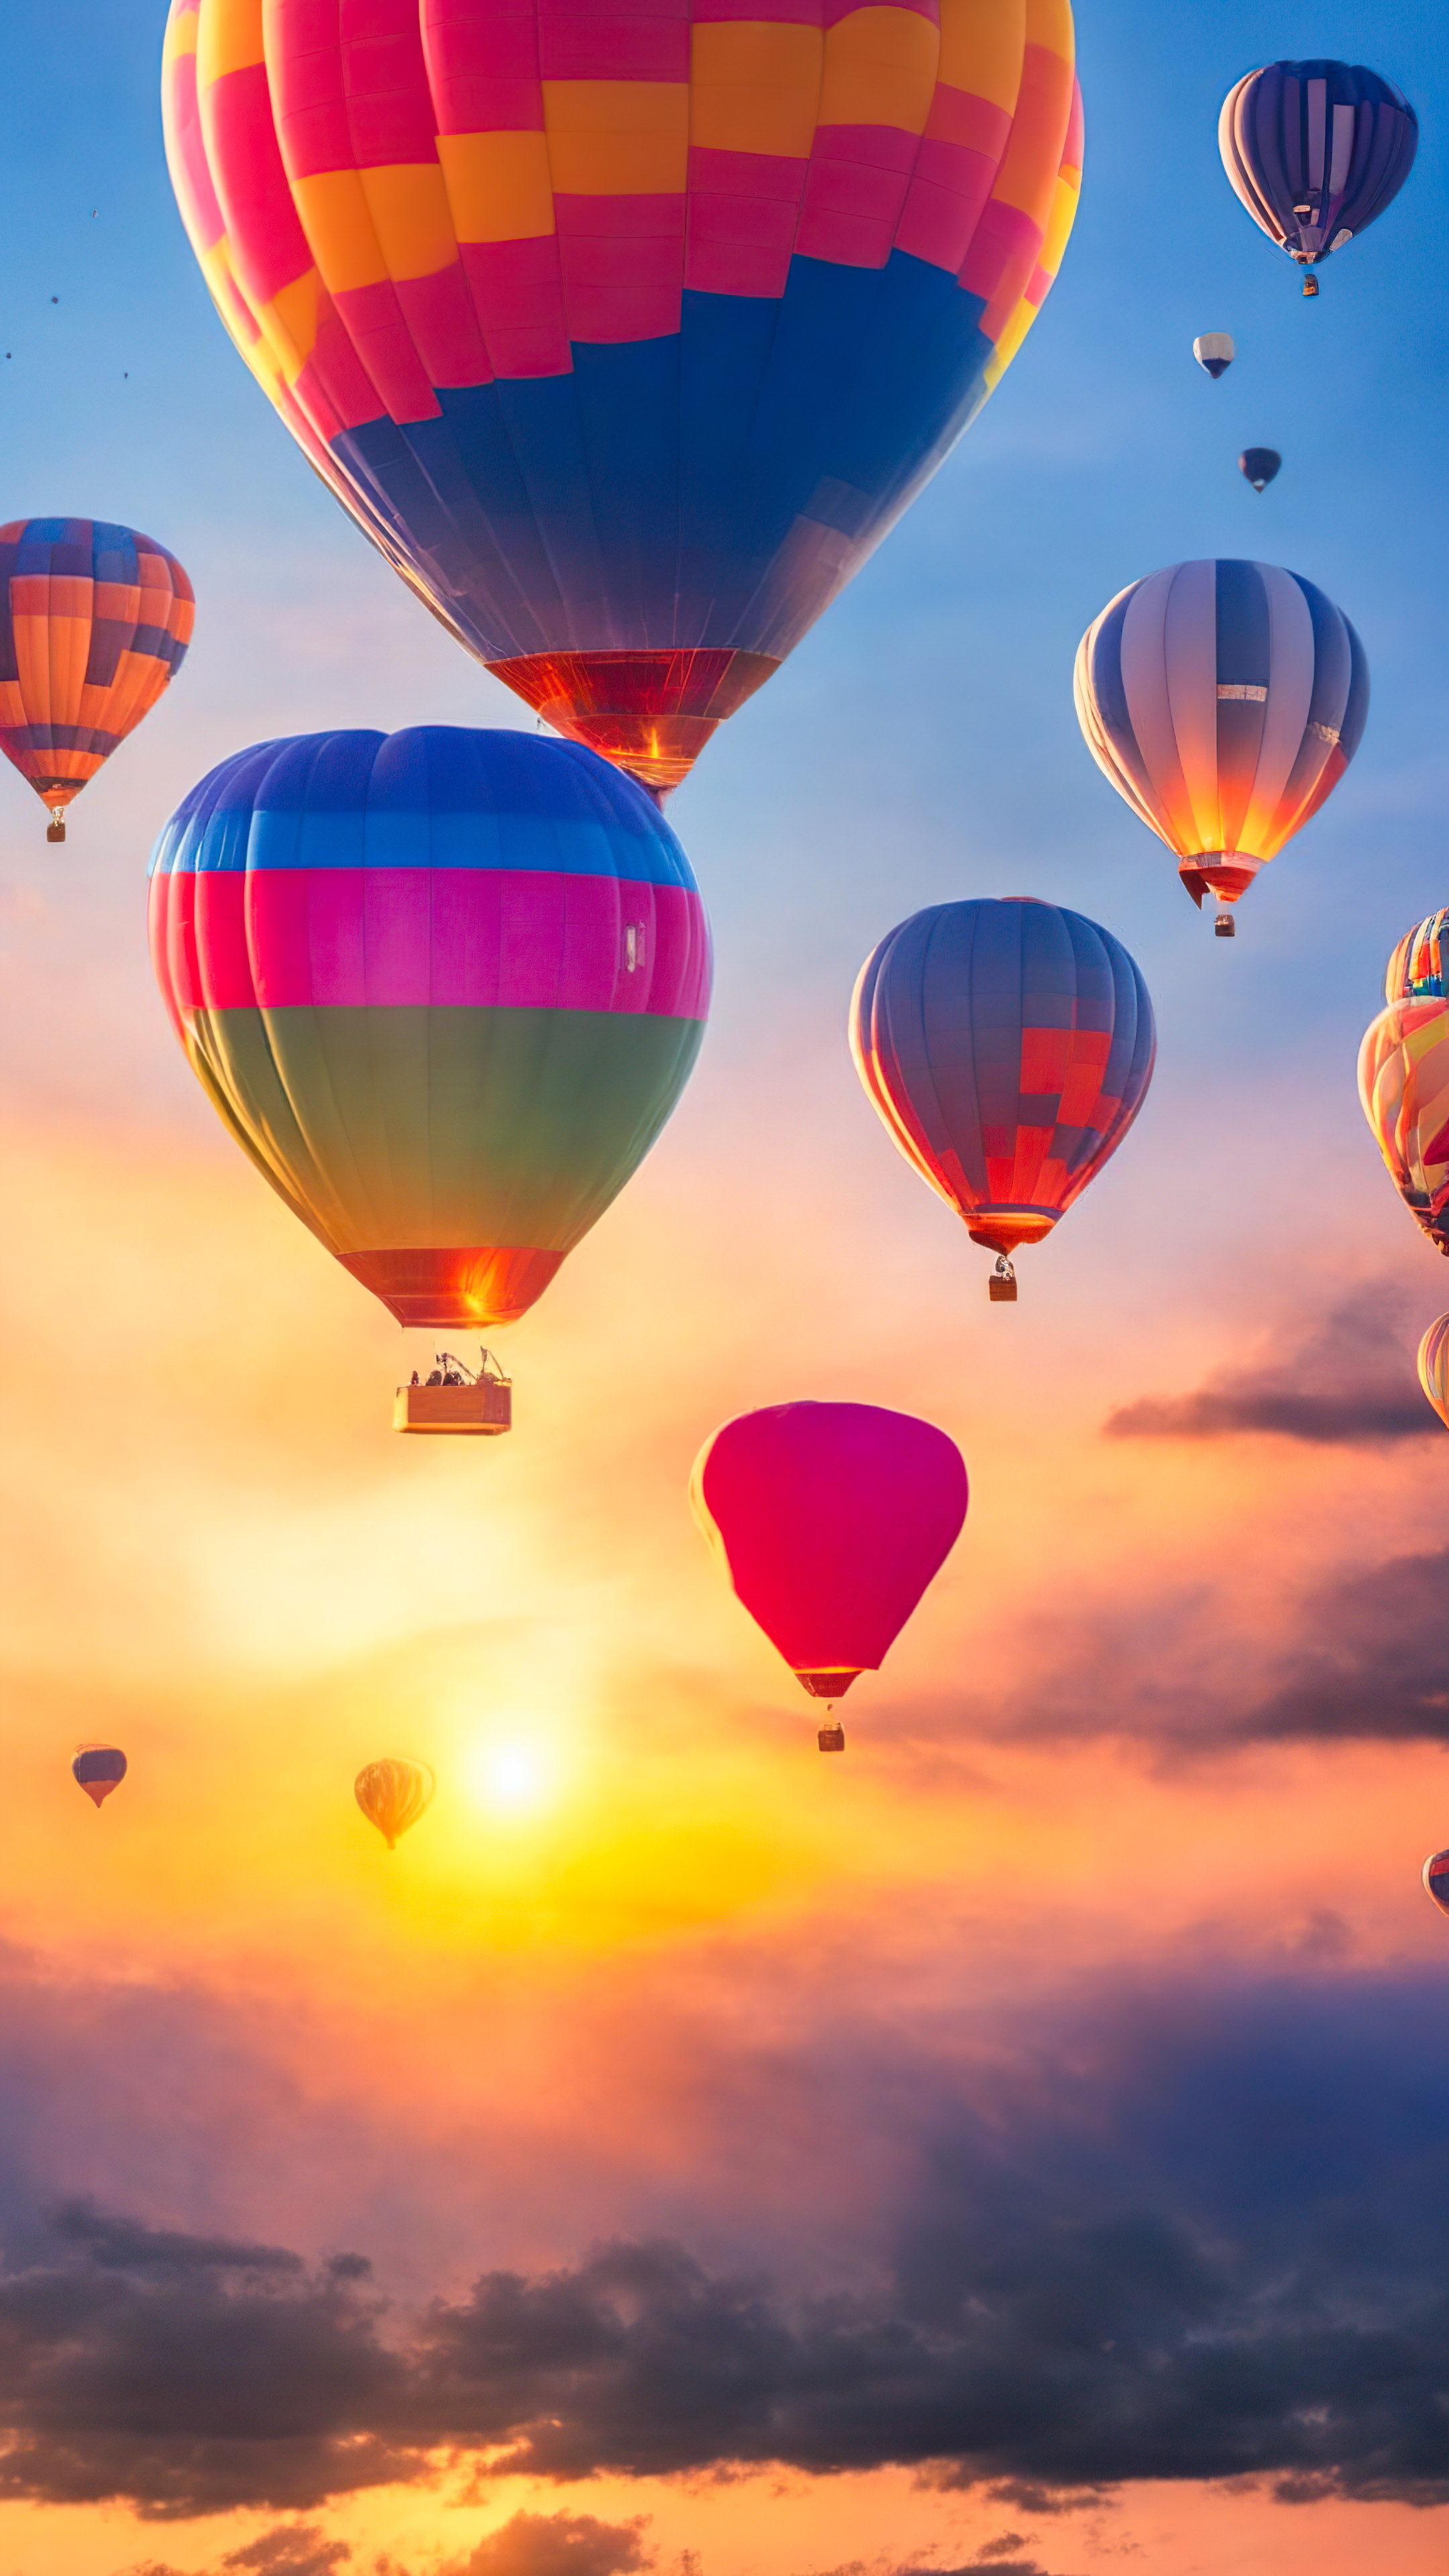 Experience the whimsy of a dreamy sky filled with floating, colorful hot air balloons at sunrise with our nature wallpaper in full HD.